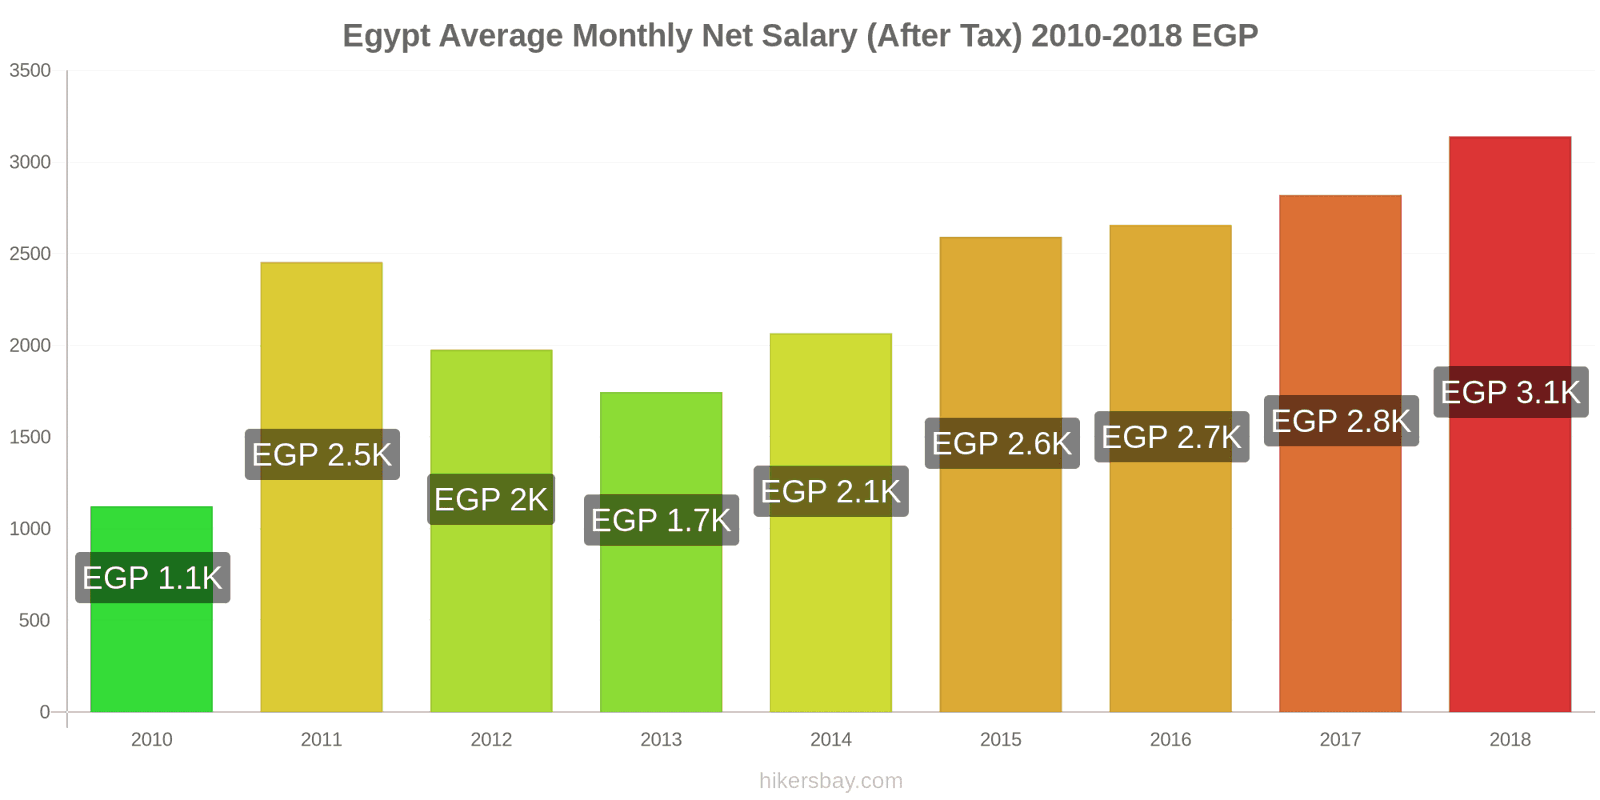 Egypt price changes Average Monthly Net Salary (After Tax) hikersbay.com